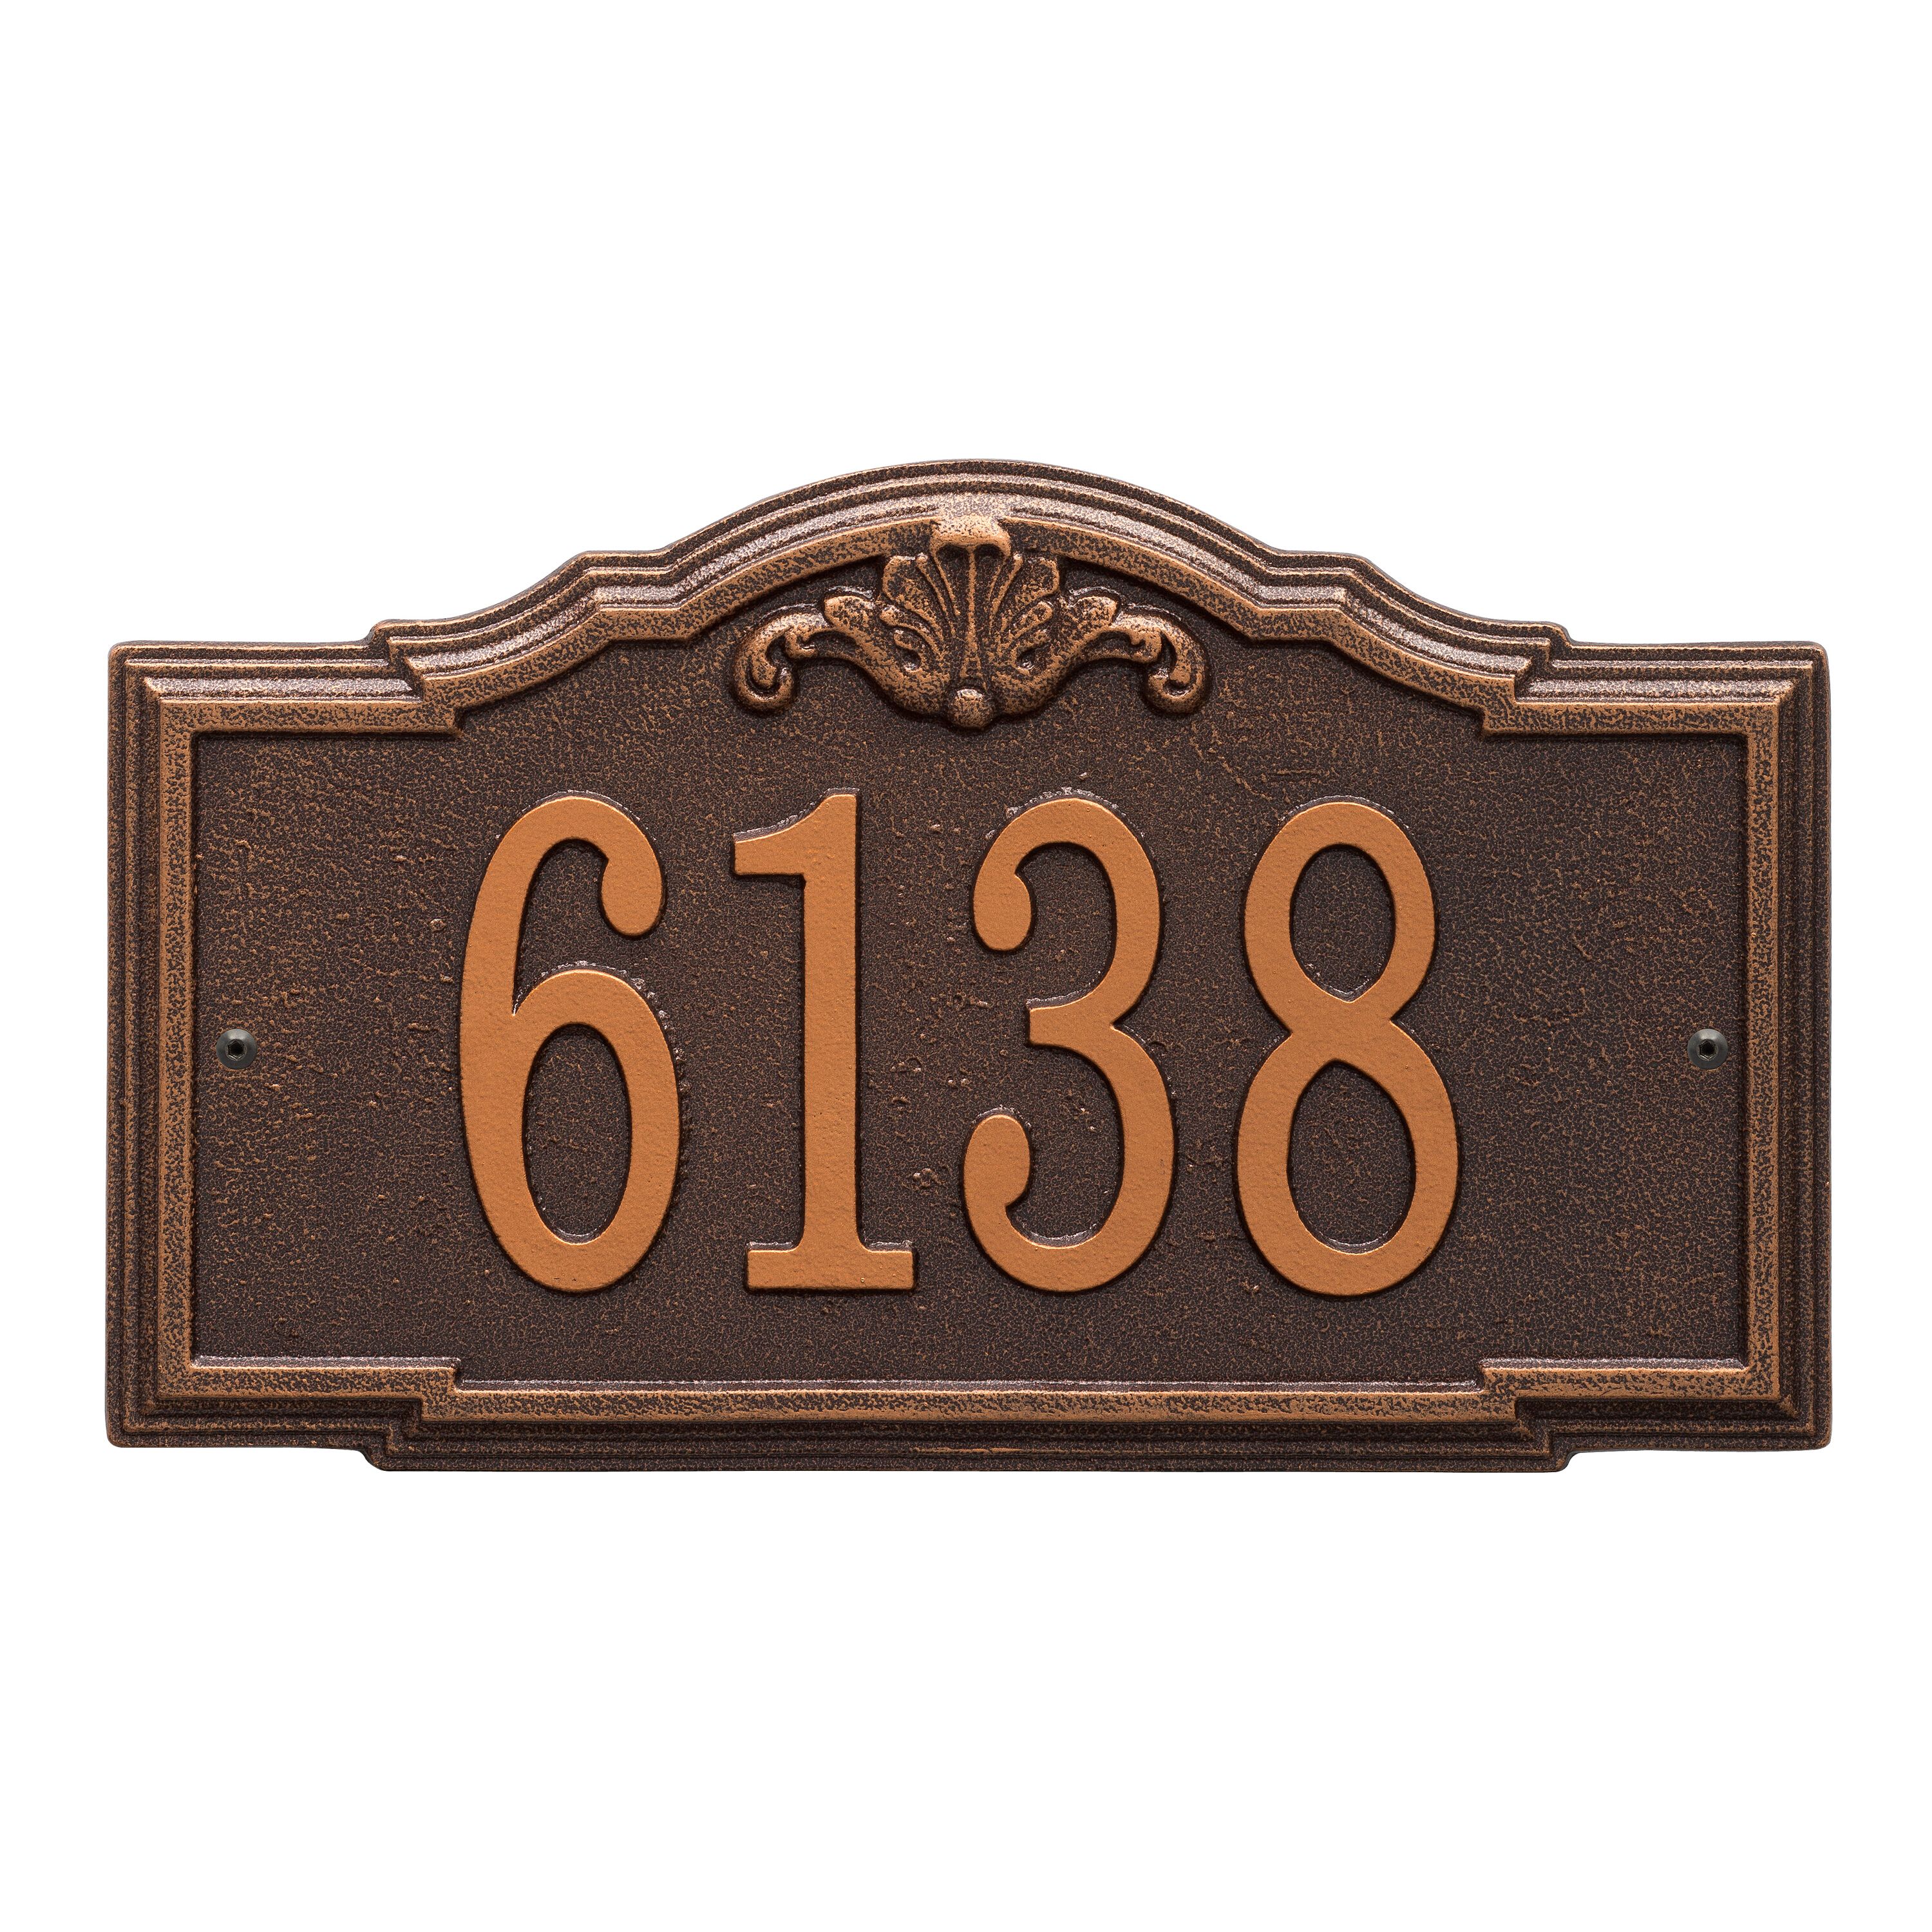 Personalized Gatewood Plaque - Standard - Wall - 1 Line 